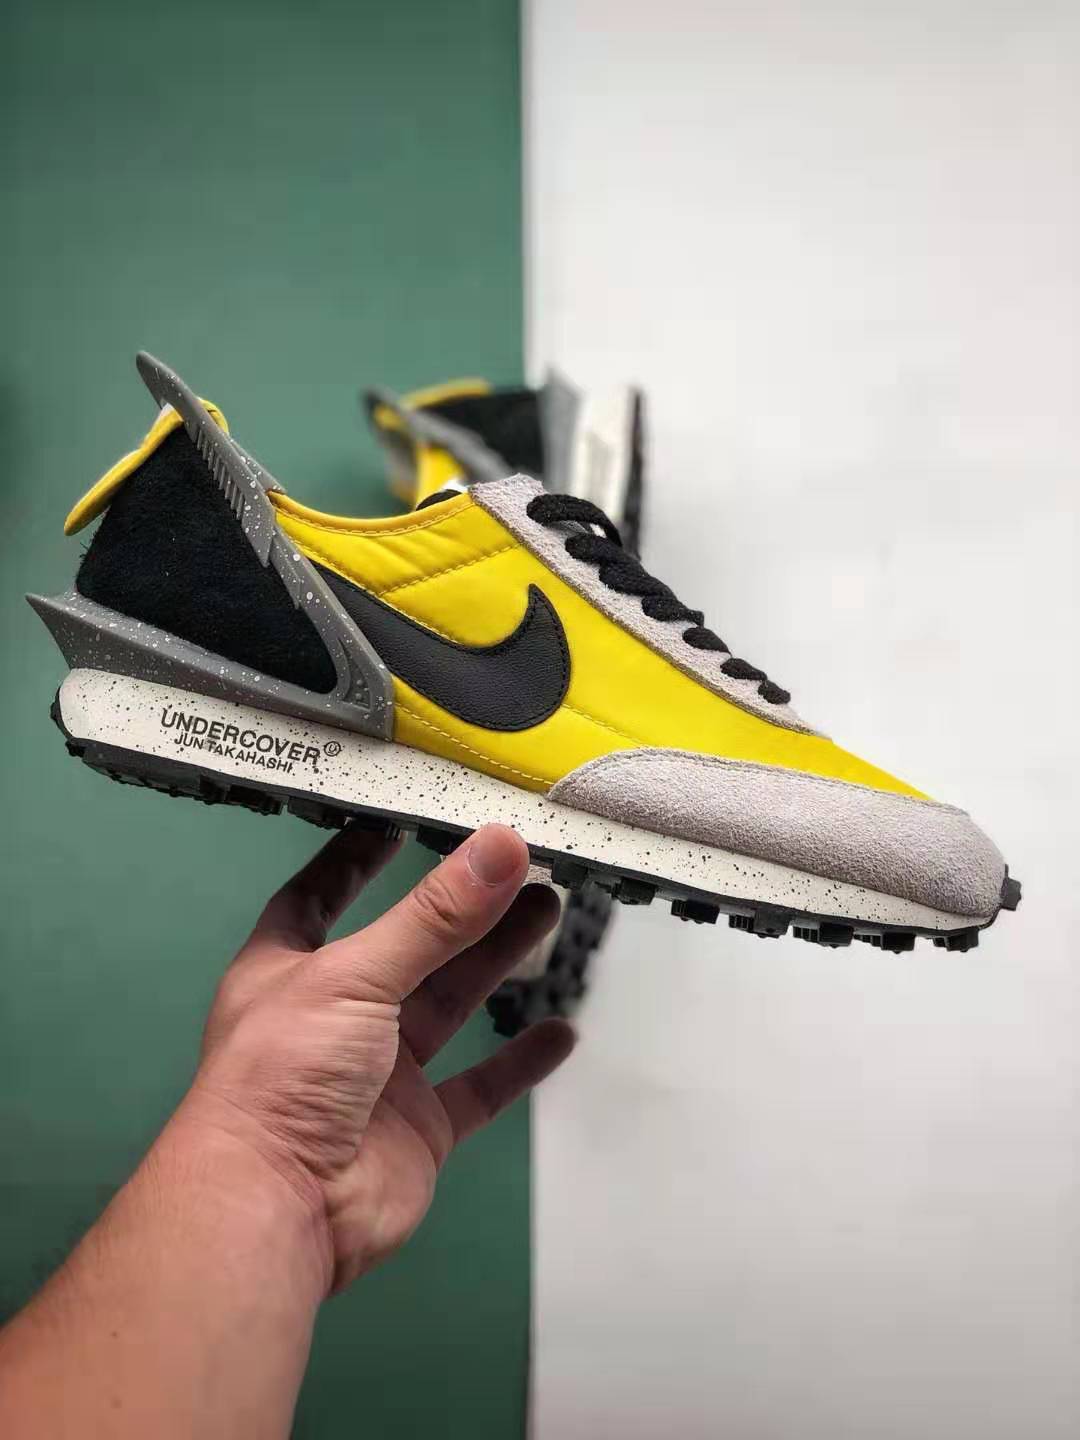 Nike Undercover x Daybreak 'Bright Citron' BV4594-700 - Shop Now For Exclusive Sneaker Collaboration